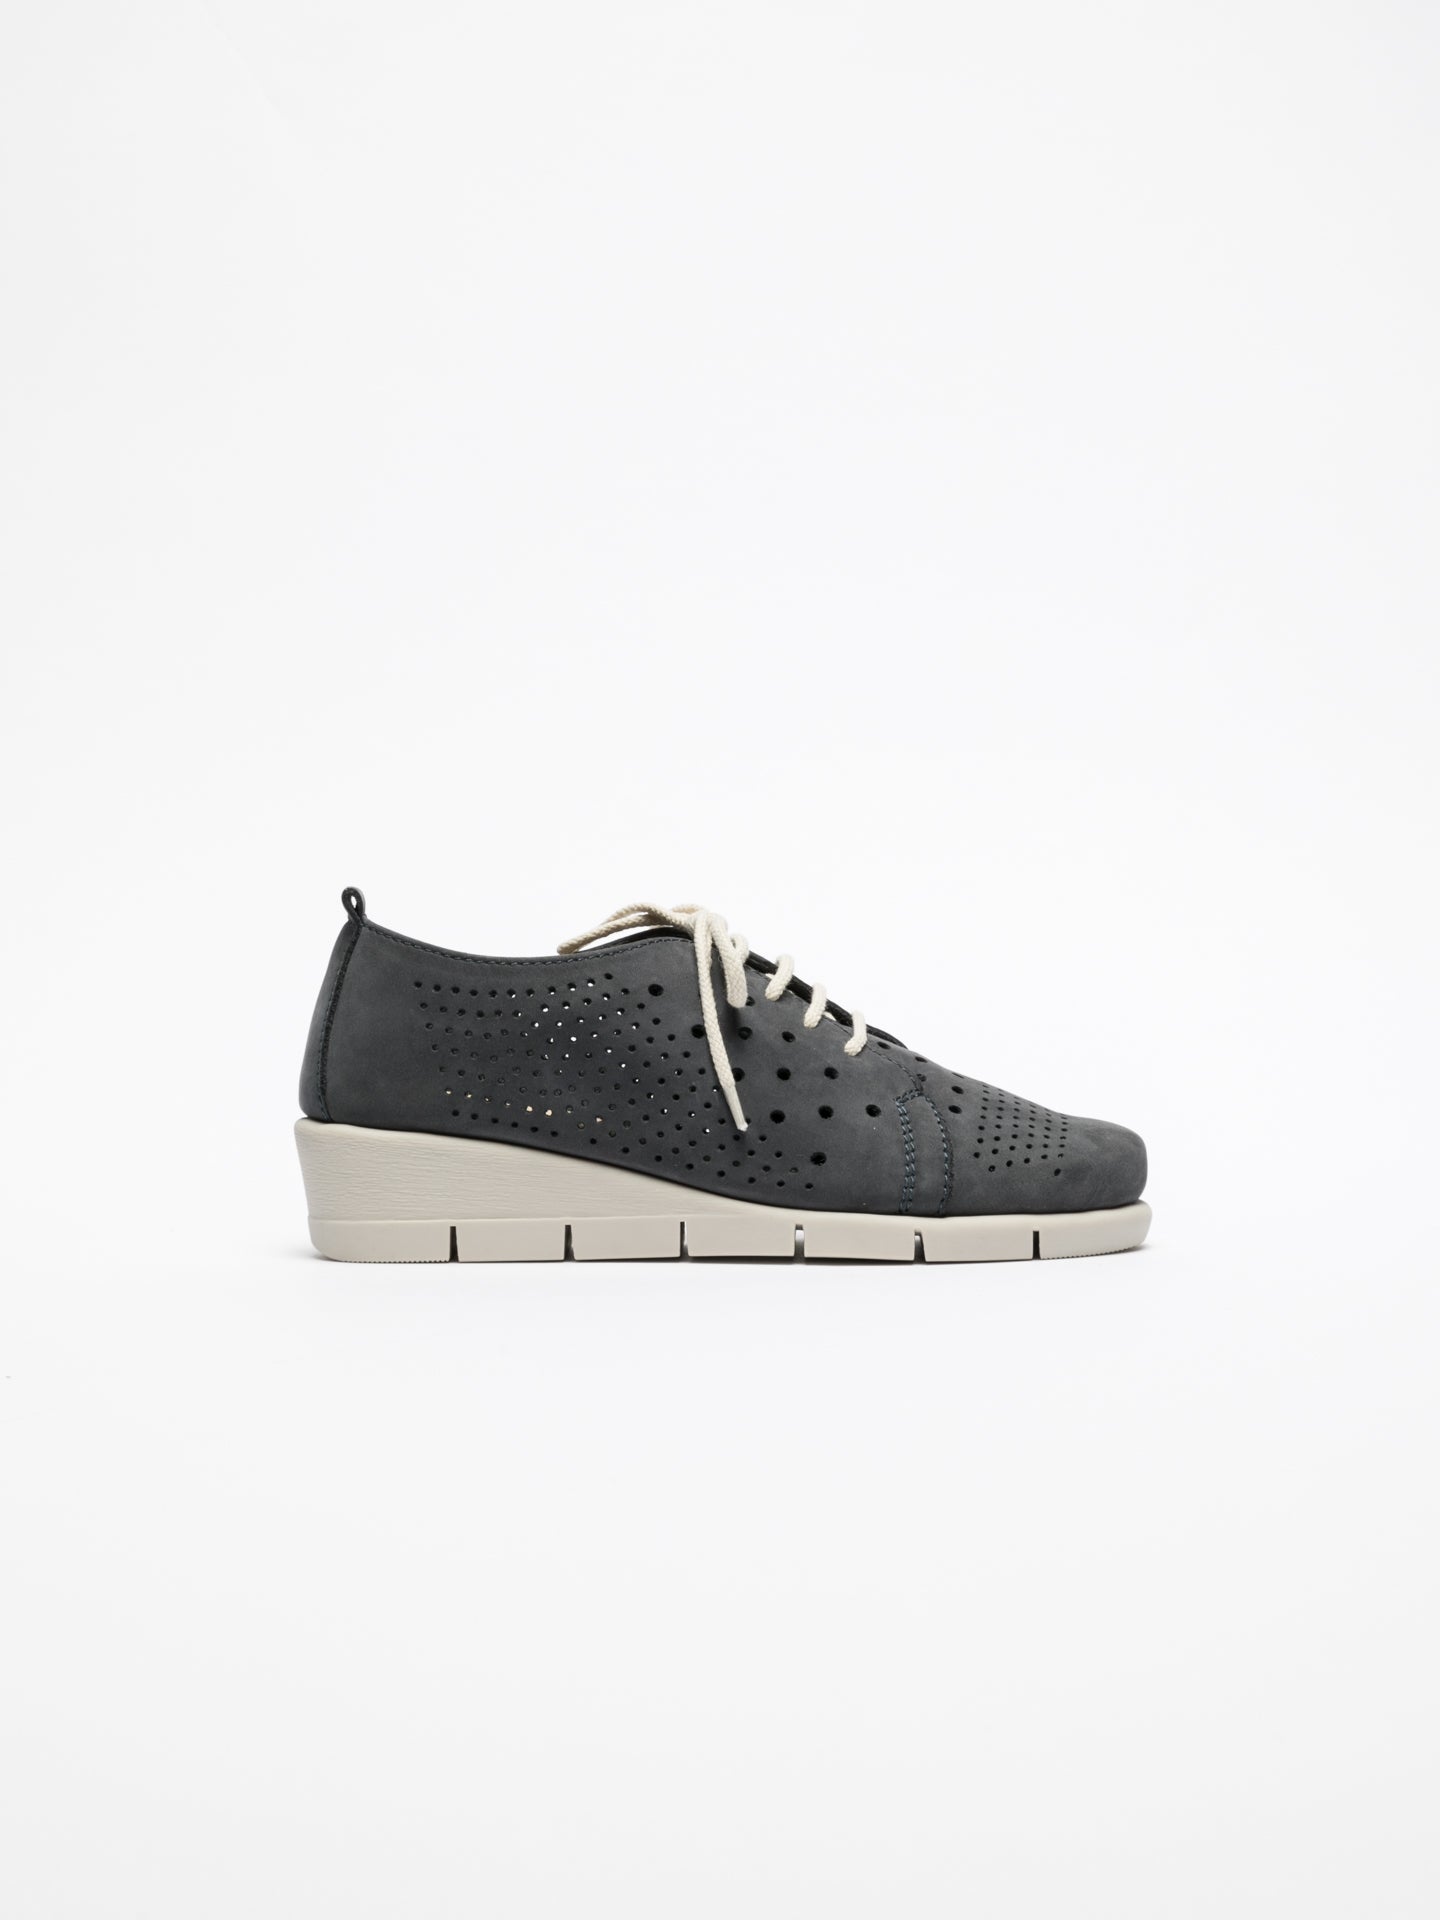 The Flexx Navy Lace Fastening Shoes